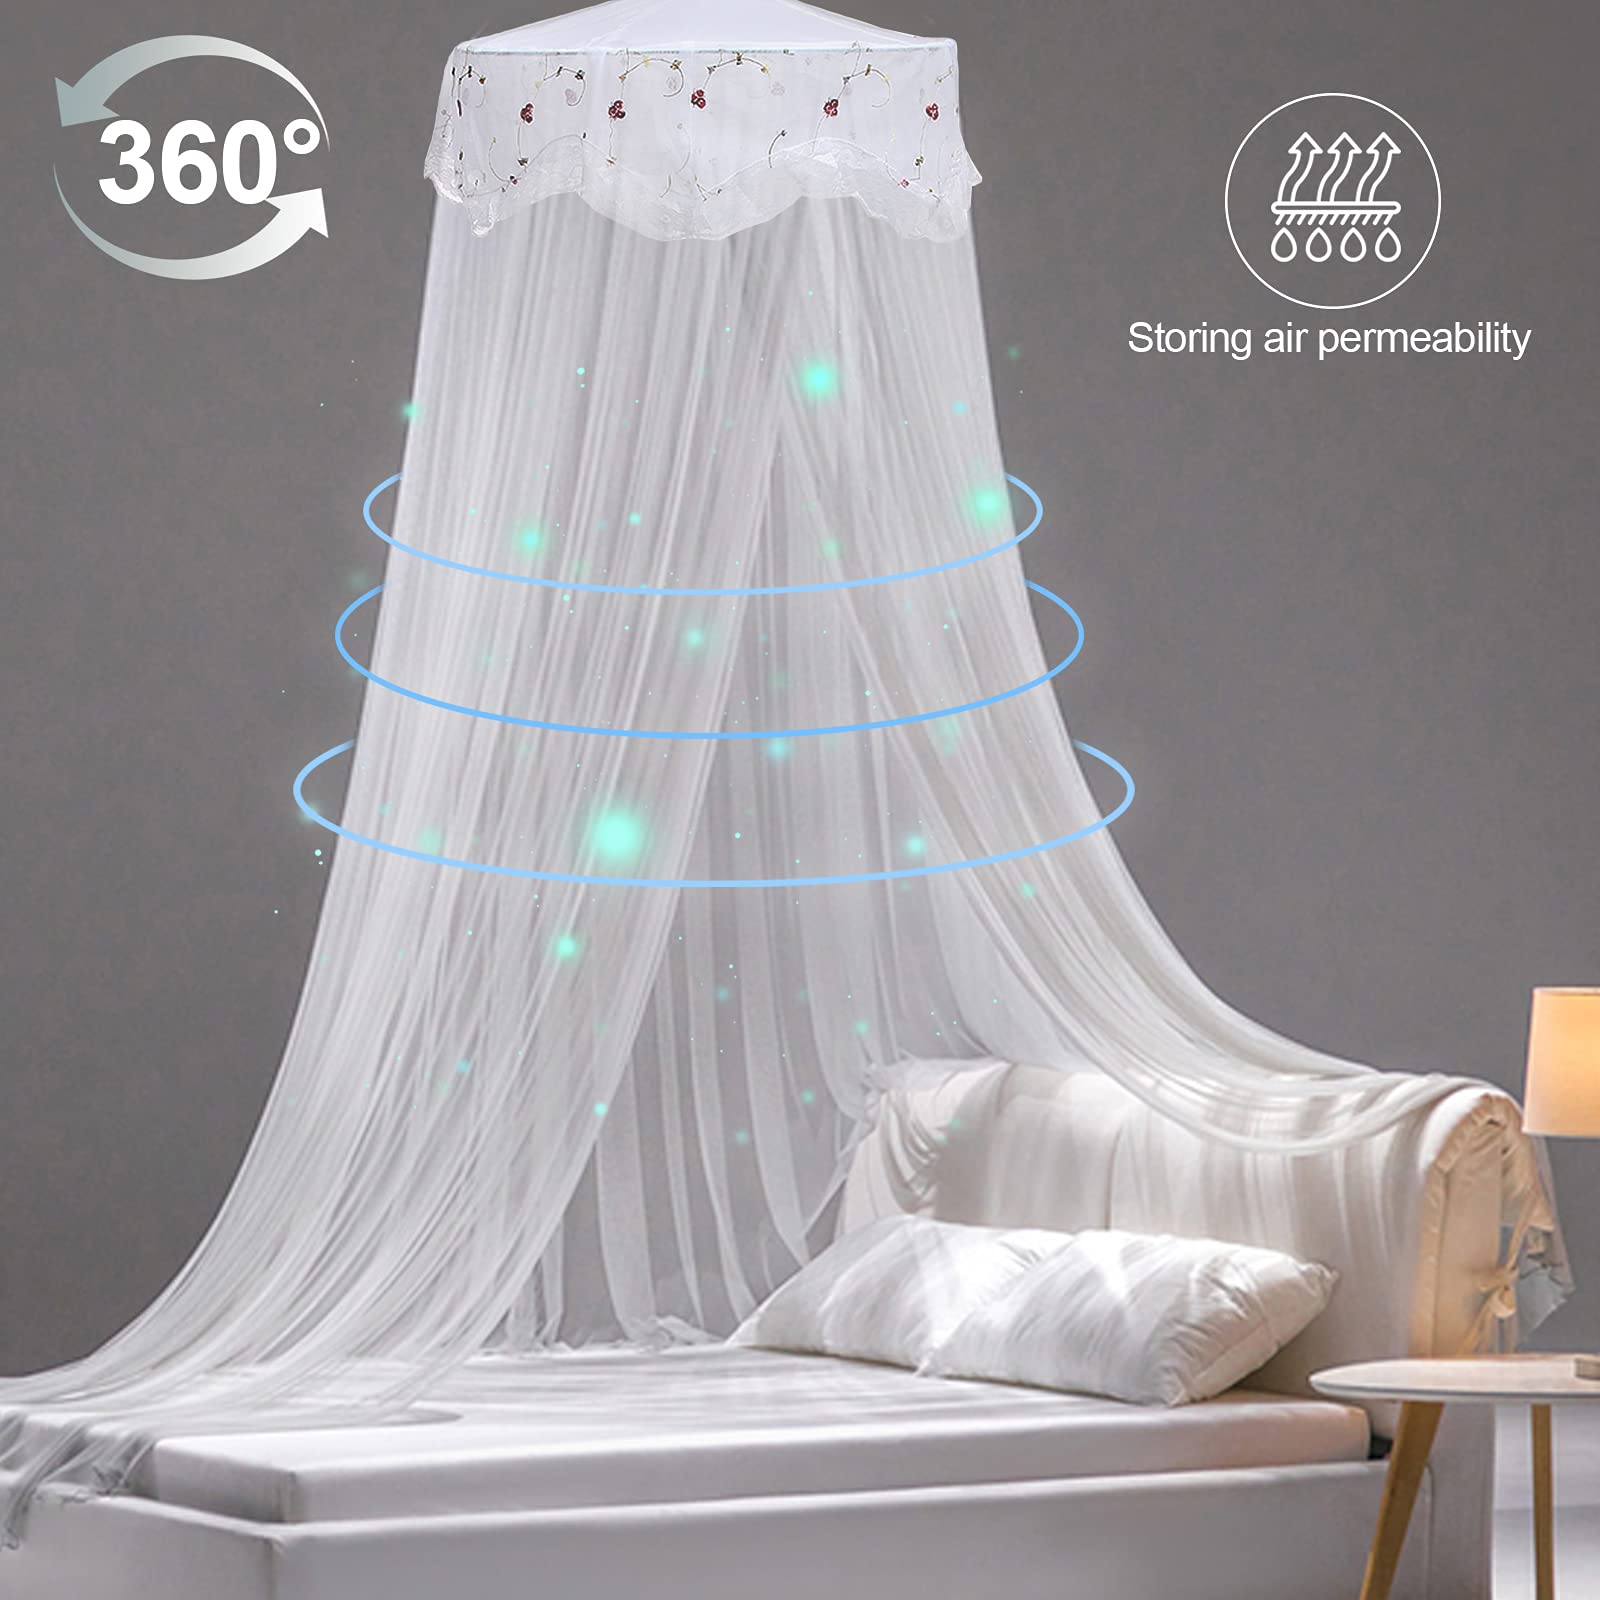 Jeteventy Bed Canopy, Princess Bed Curtain Net for Single to King Size,Bedroom Decoration of Round Lace Dome with Stainless Steel Hook,Quick Easy Installation (White)